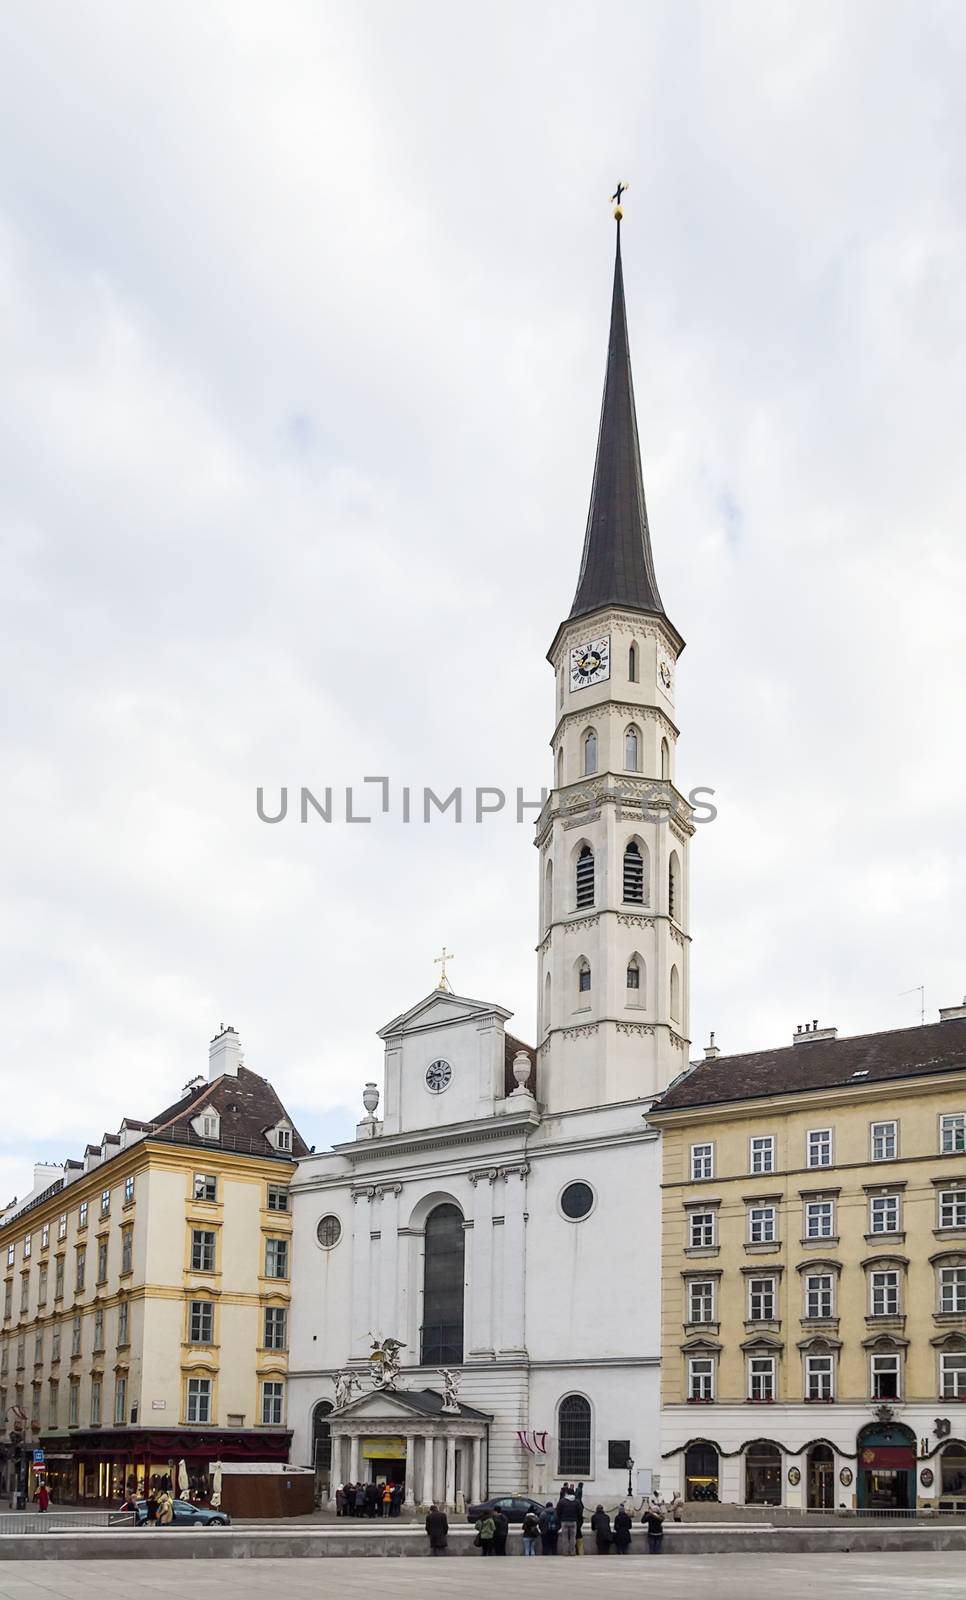 St. Michael's Church is one of the oldest churches in Vienna, Austria, and also one of its few remaining Romanesque buildings.